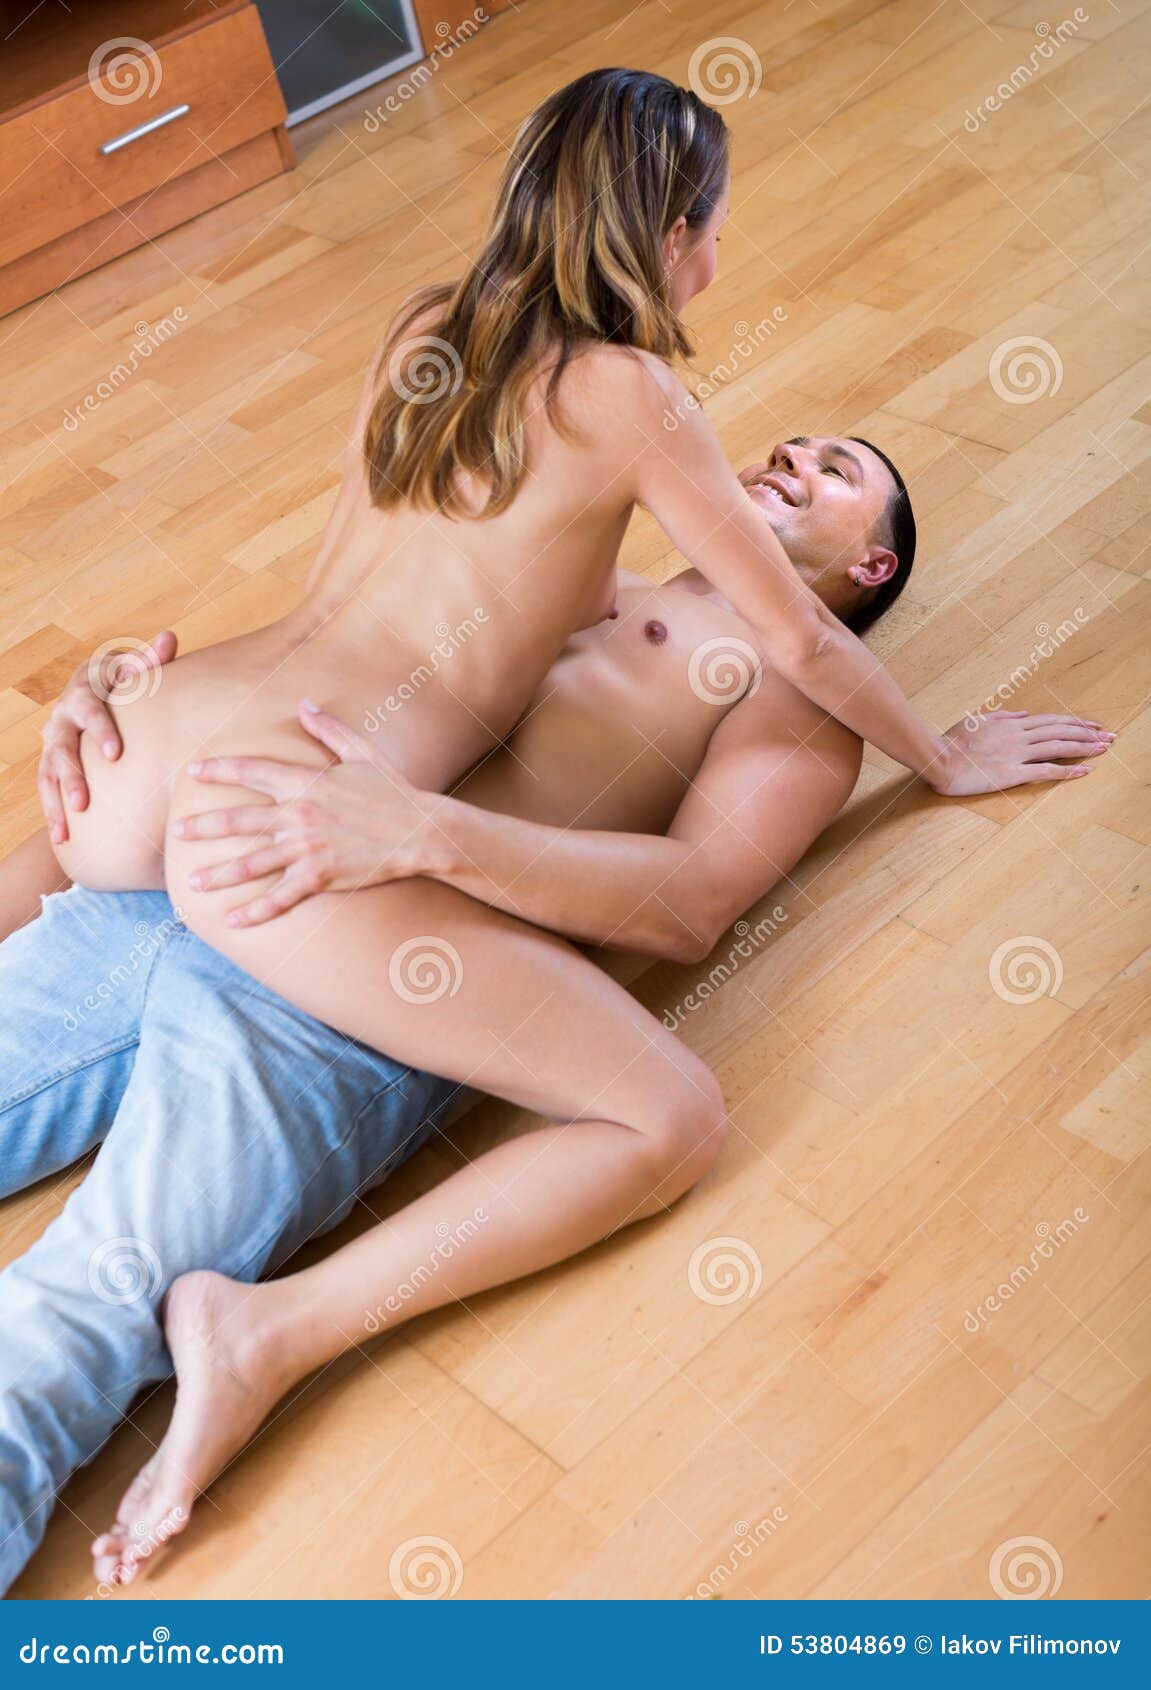 Woman and Man Making Love Indoor Stock Image image